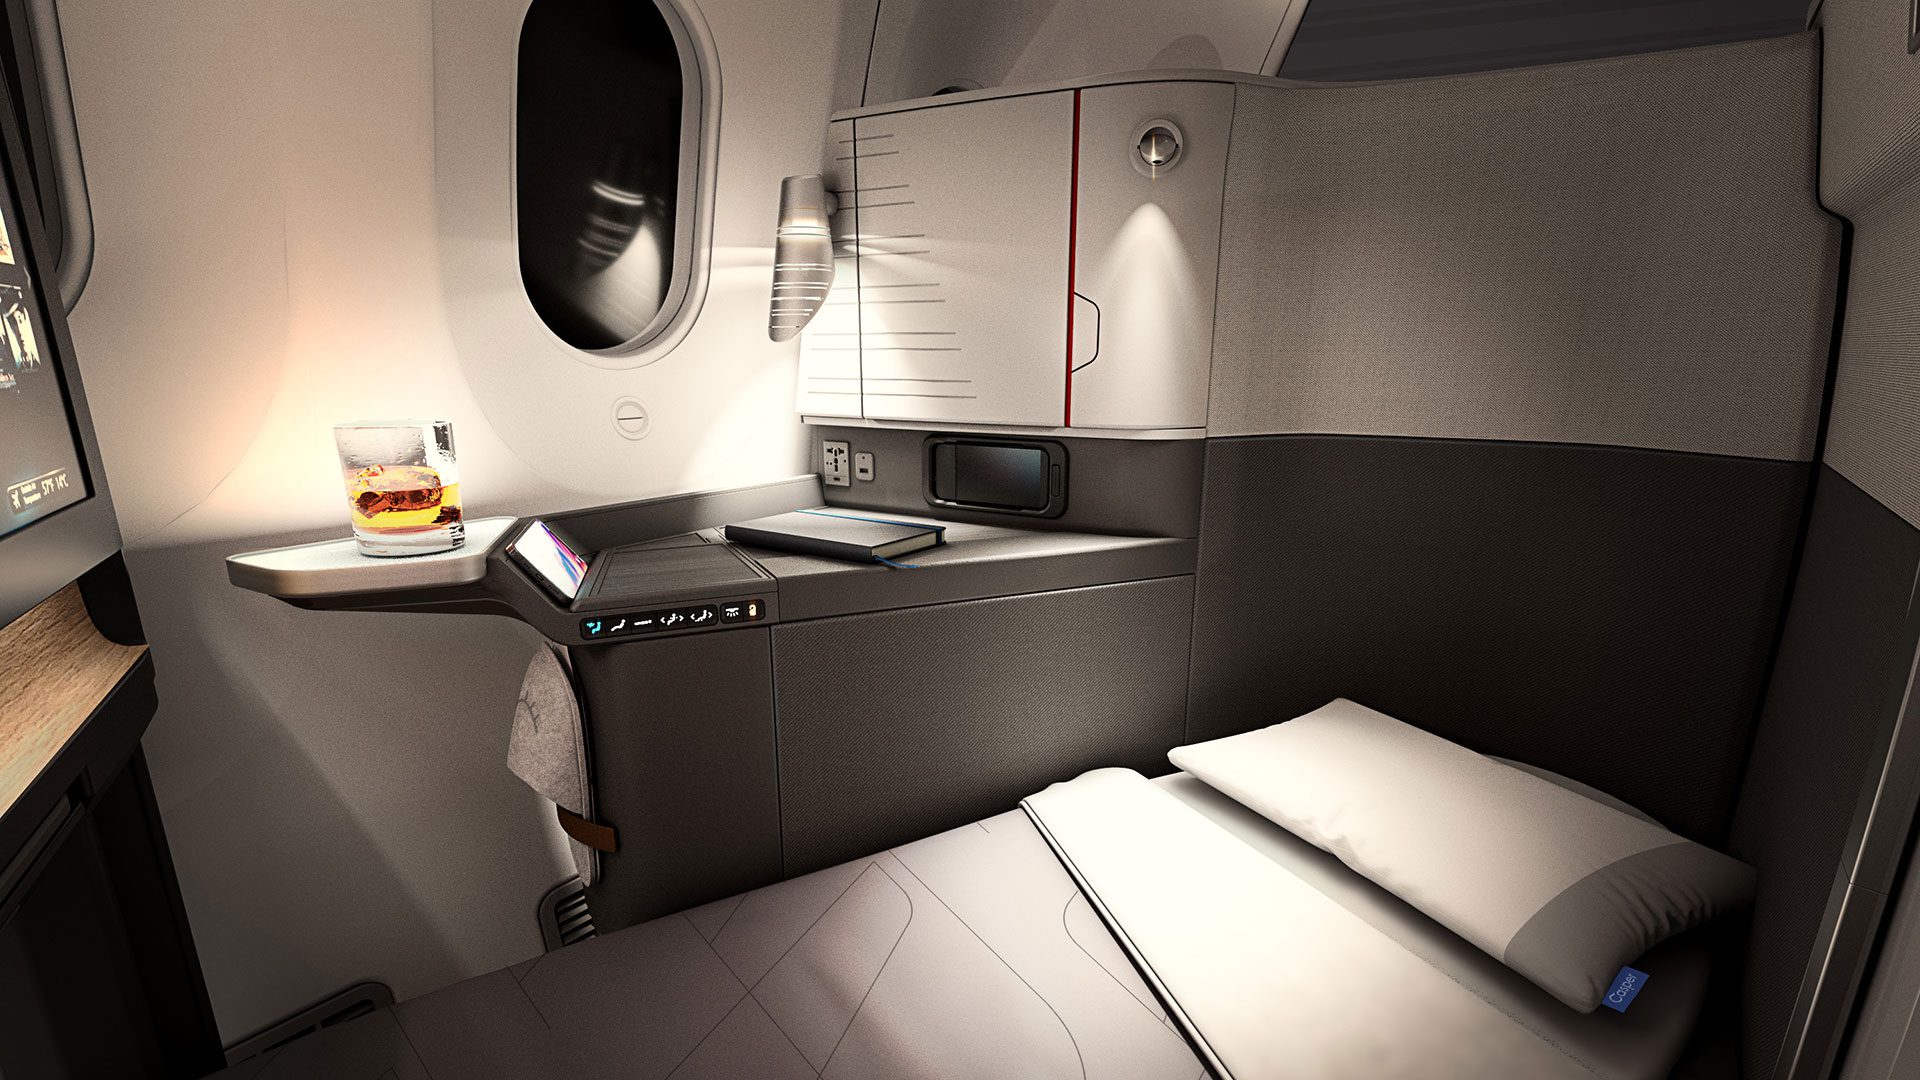 Boeing 787-9 Flagship Suite offers added comfort with reclining seats and can also convert to reclining position.